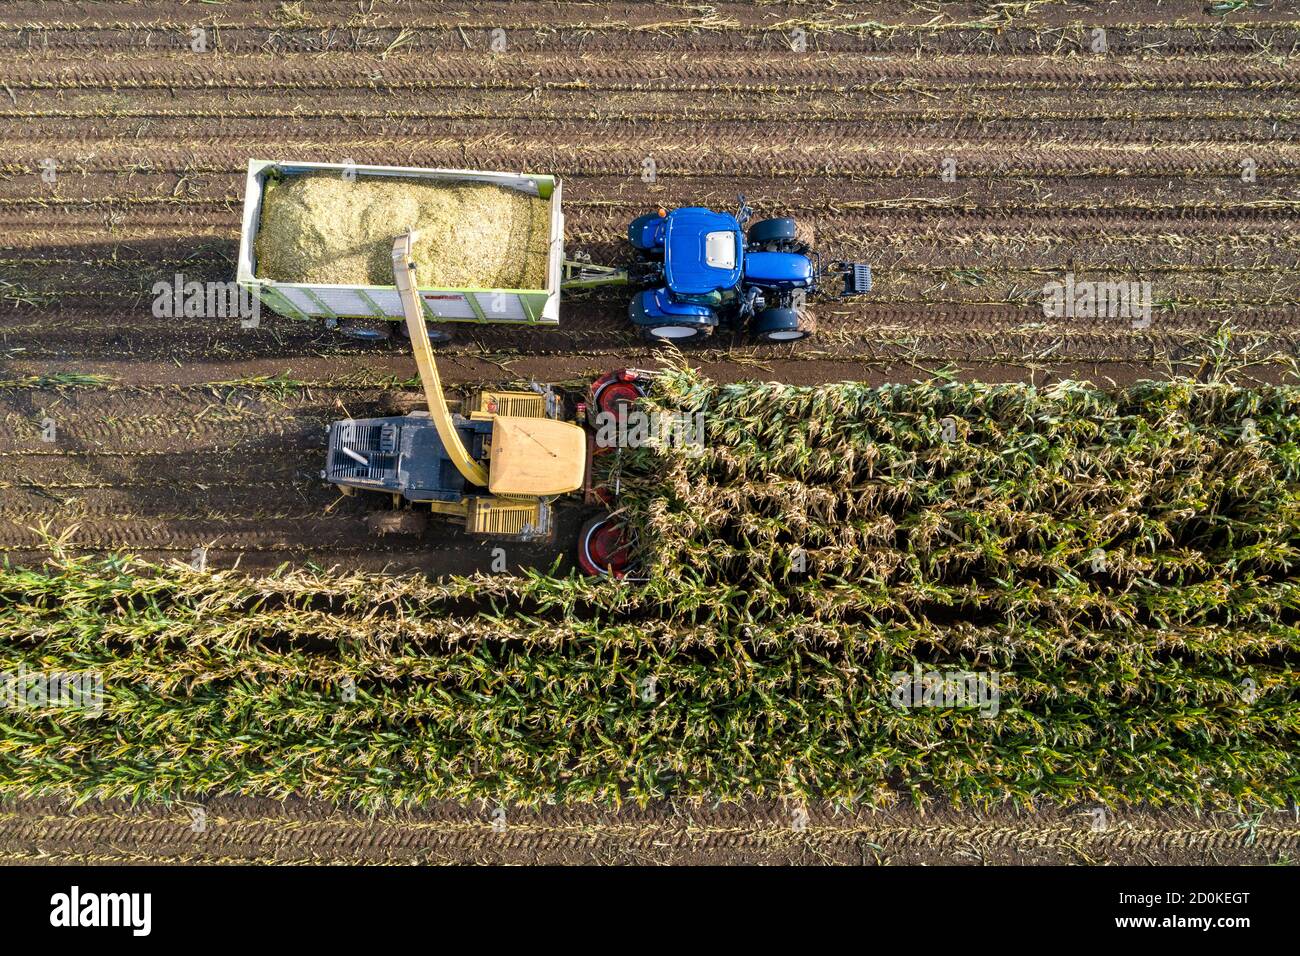 Maize harvest, combine harvester, chopper works its way through a maize field, silage is pumped directly into a trailer, serves as animal feed, Lower Stock Photo